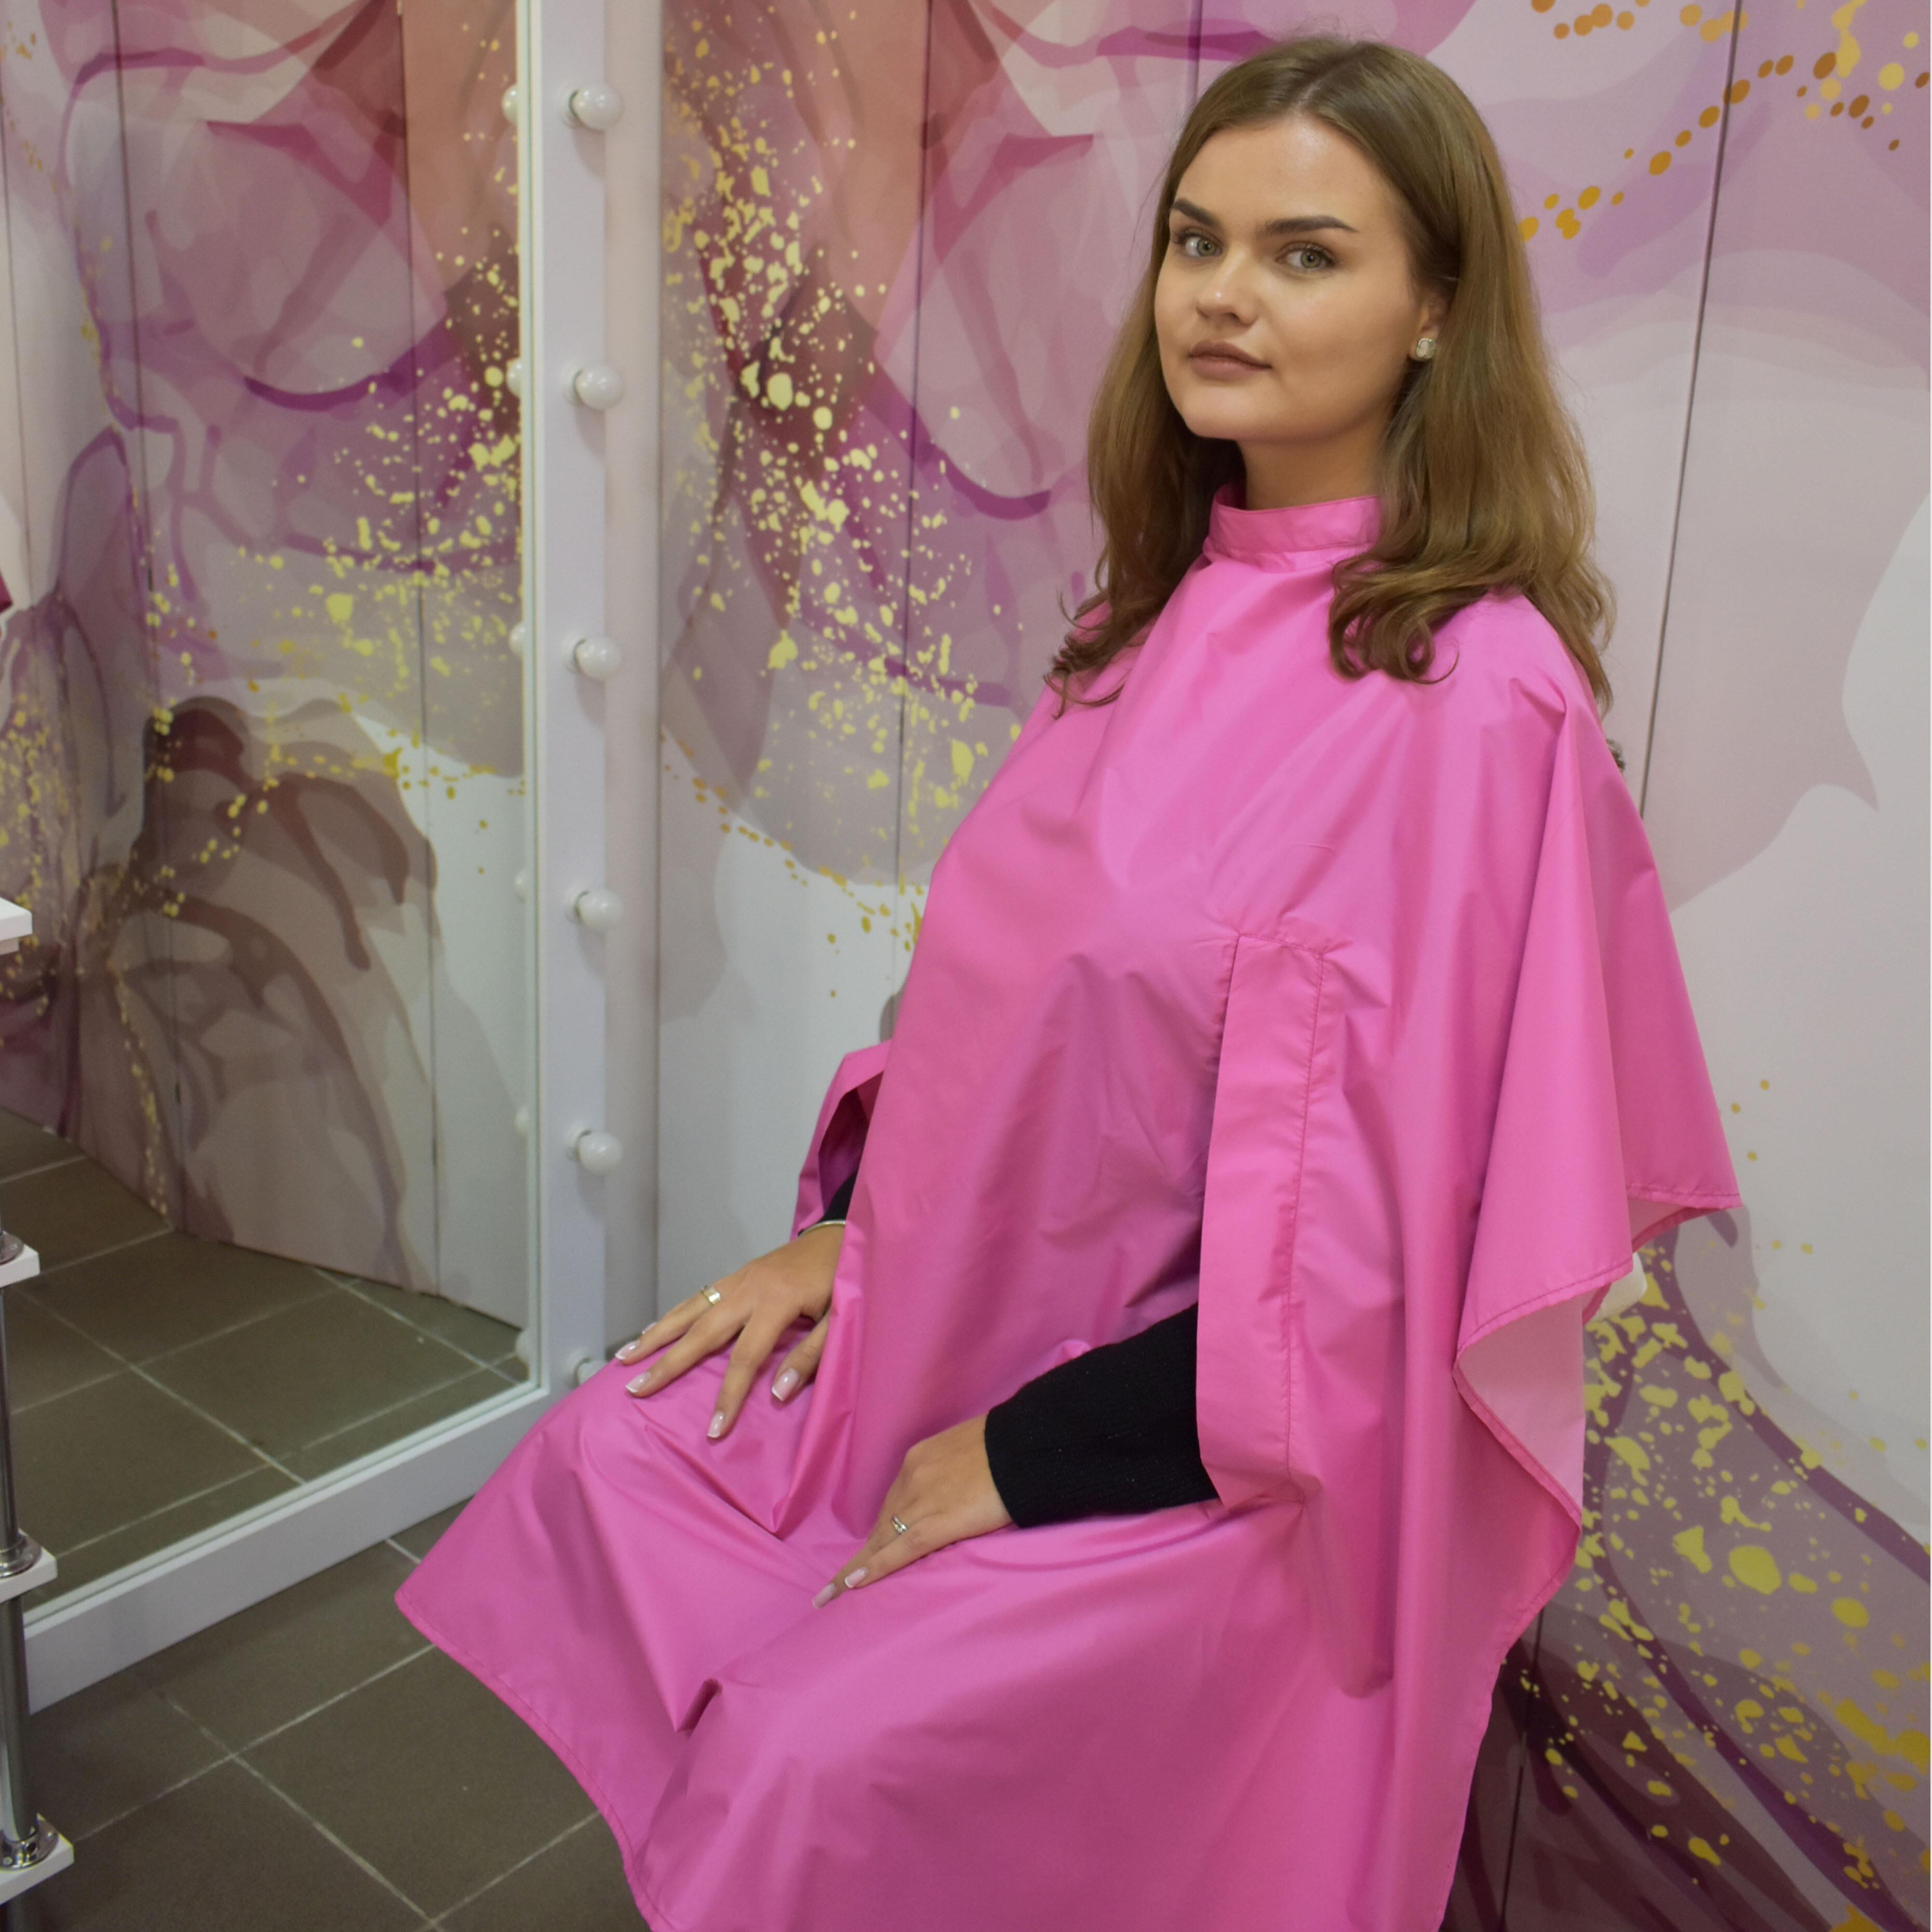 Nibano Hair Cutting Gown Pink Barbie with handsplit